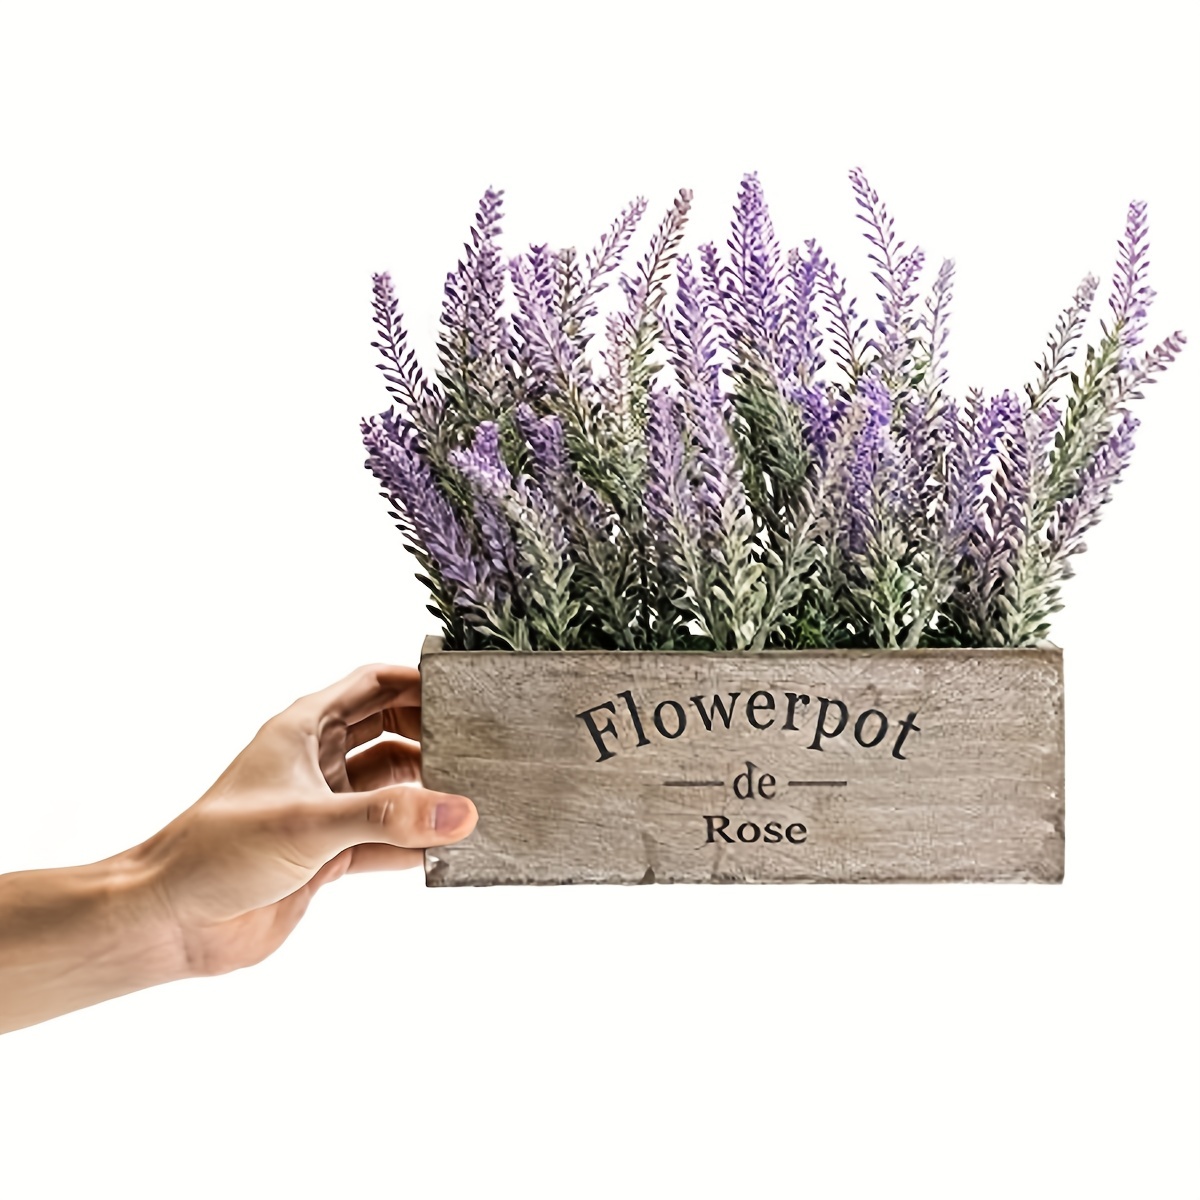 Velener Purple Artificial Lavender Flowers with Decorative Tray Wooden Box  9 Inches - Lifelike Faux Lavender Plants for Home and Office Decor, Fake